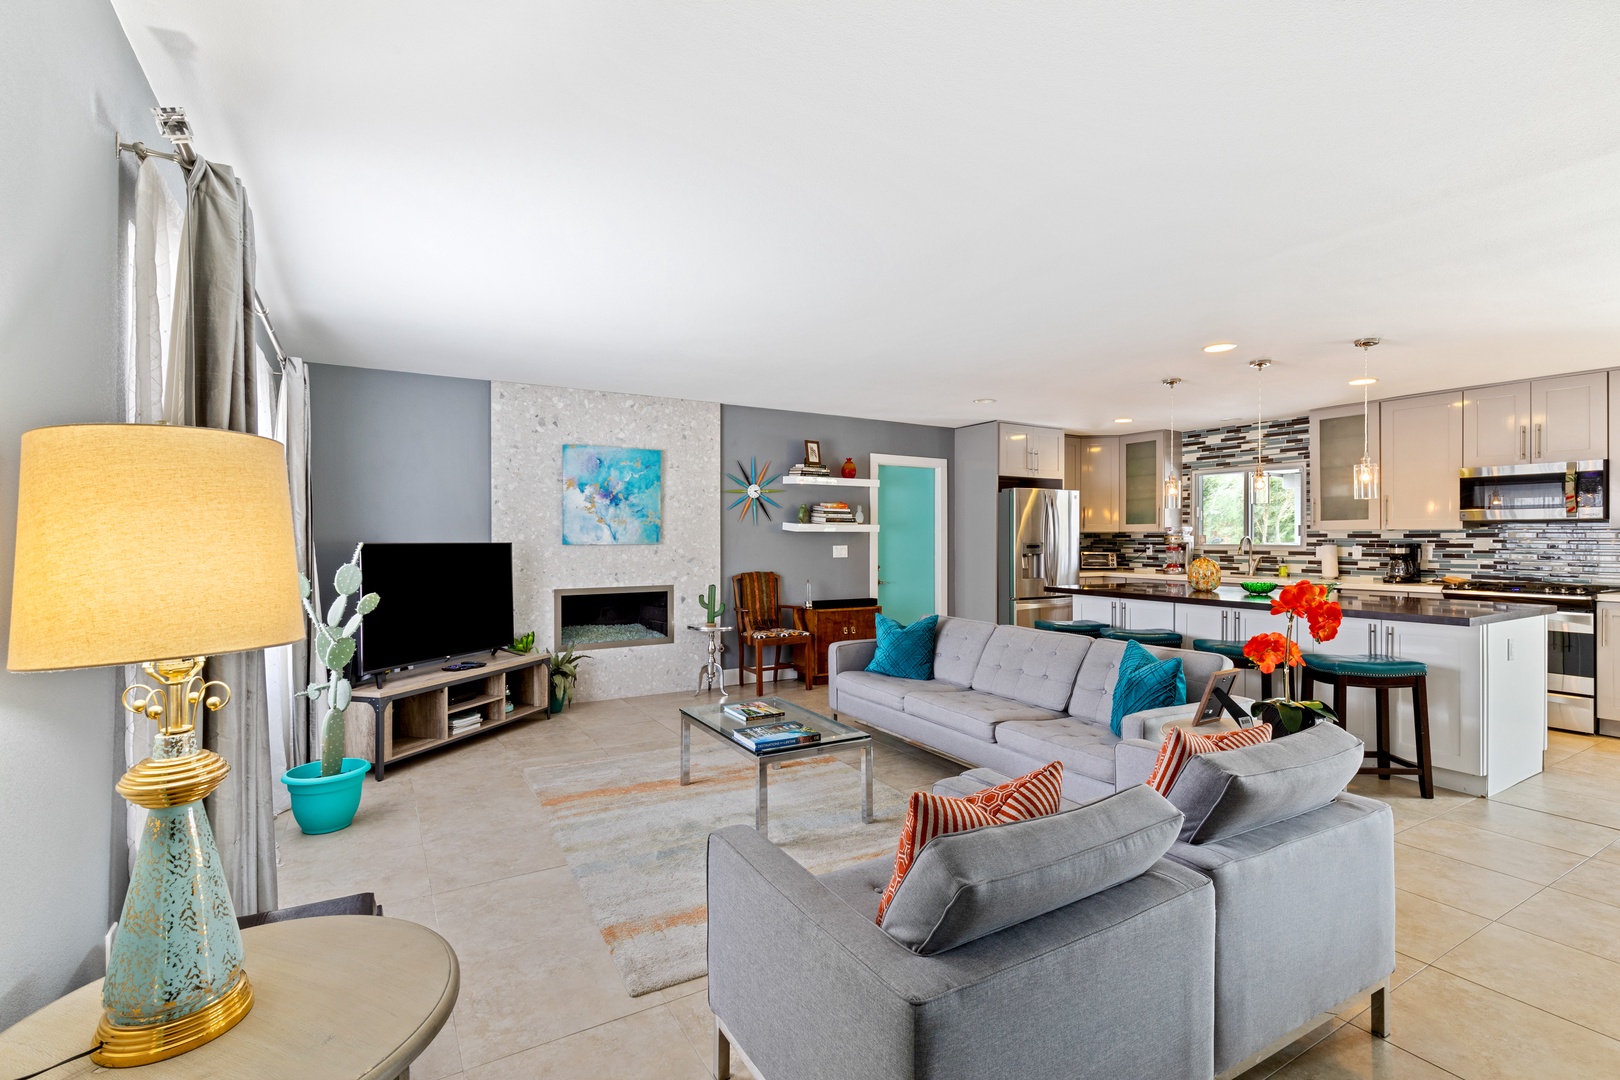 Open living space with ample seating